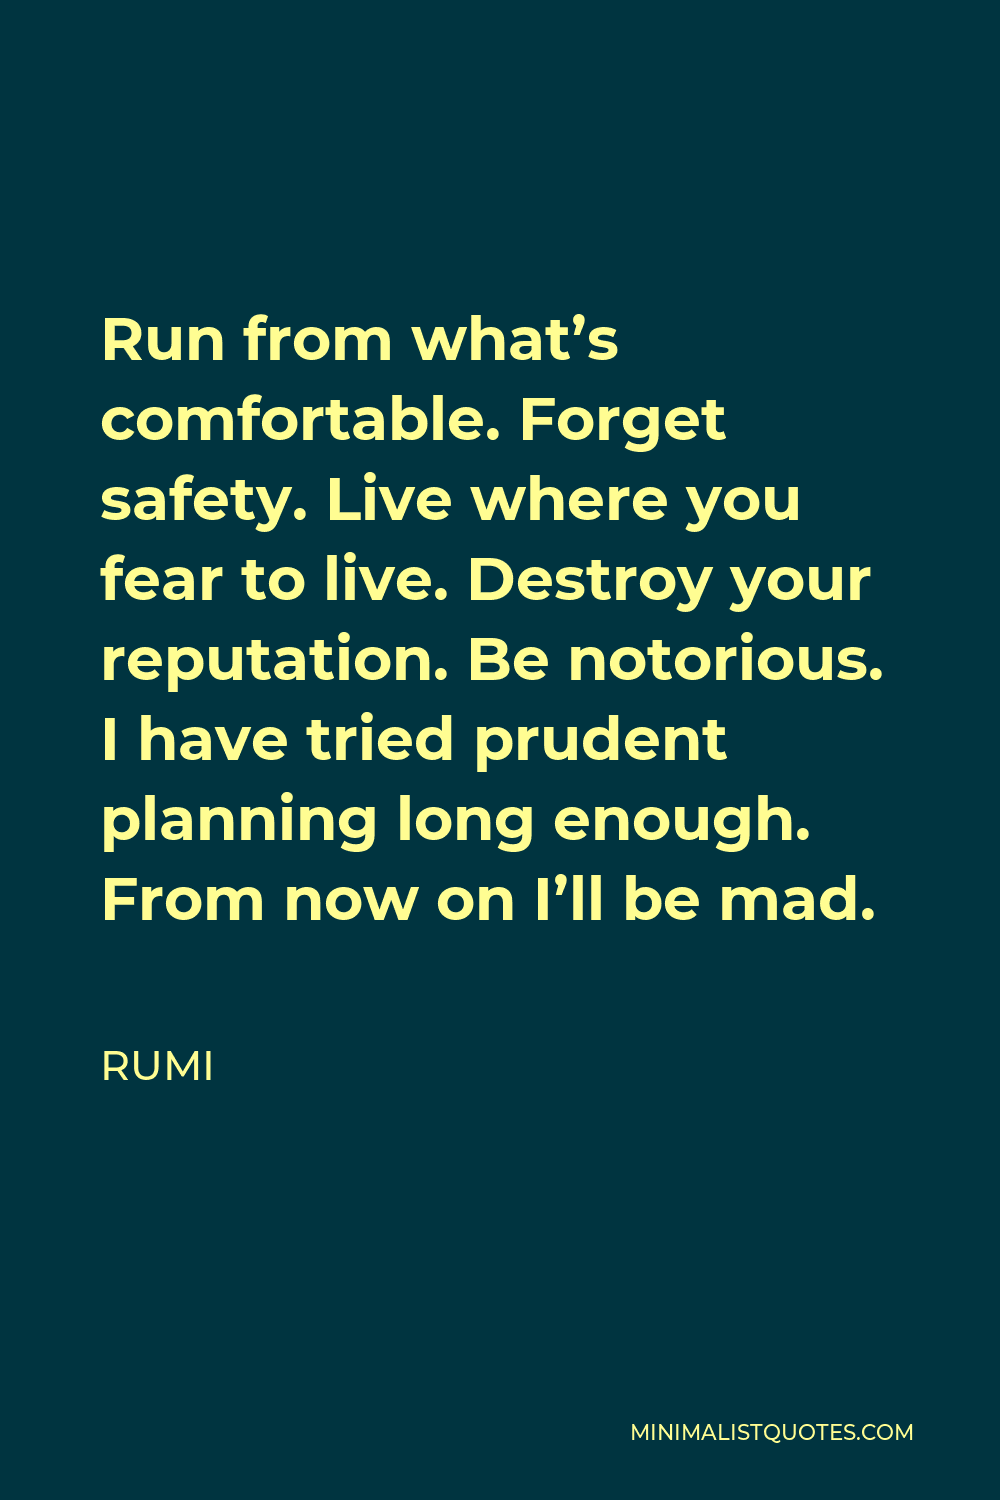 Rumi Quote - Run from what’s comfortable. Forget safety. Live where you fear to live. Destroy your reputation. Be notorious. I have tried prudent planning long enough. From now on I’ll be mad.